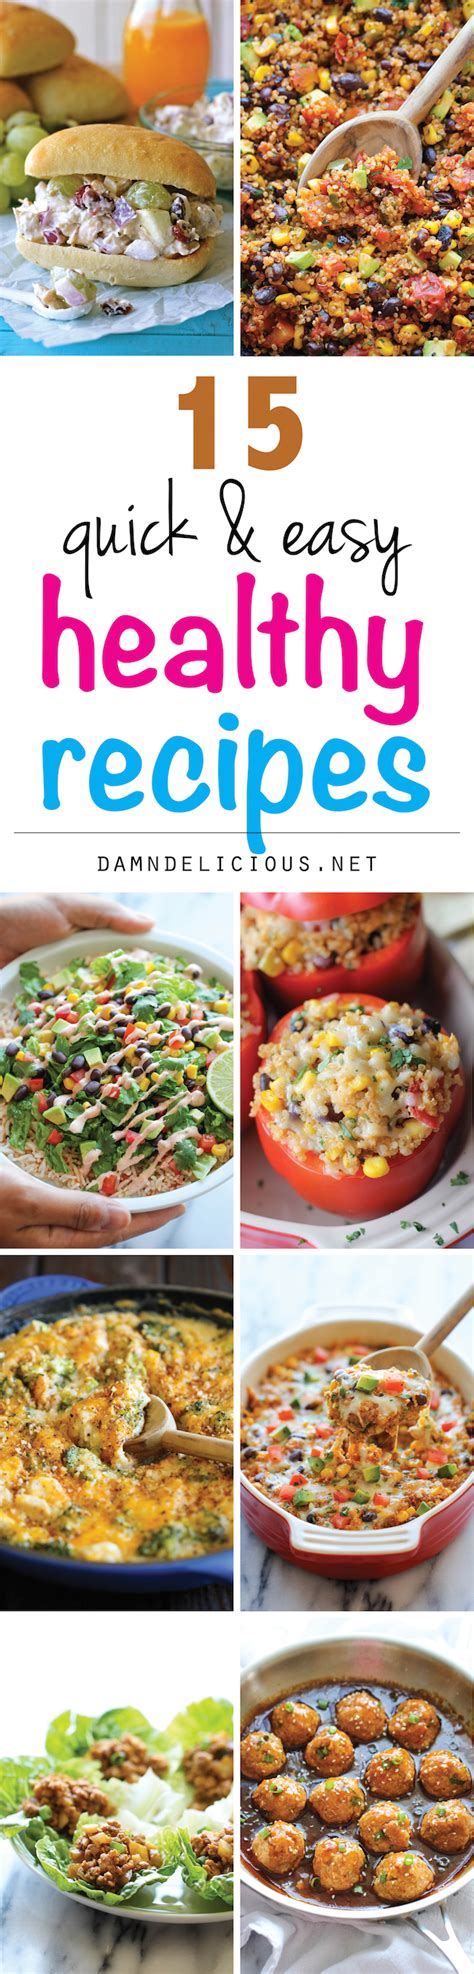 15-quick-and-easy-healthy-recipes-damn-delicious image